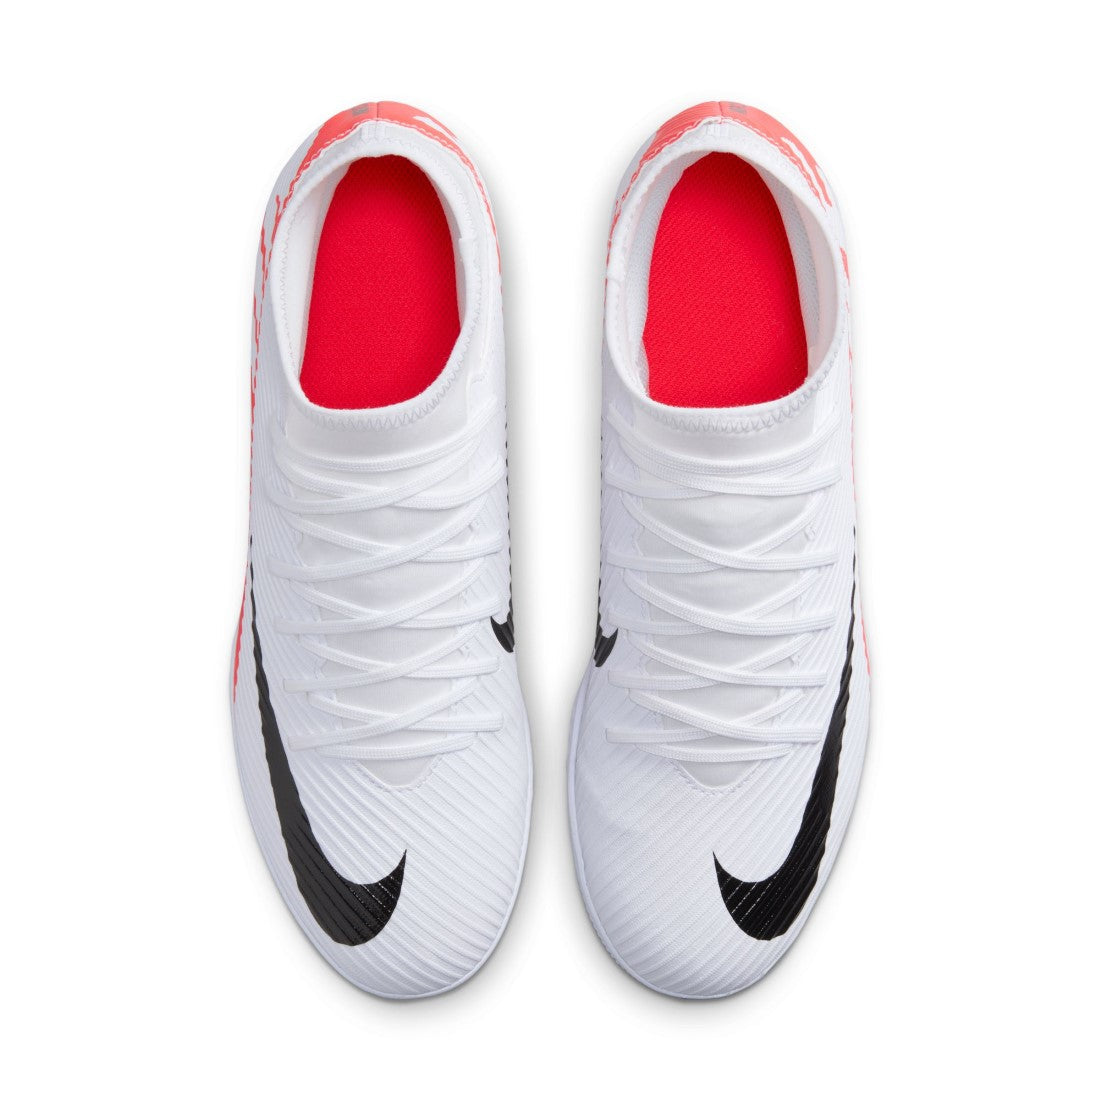 Superfly 9 Club Ic Soccer shoes